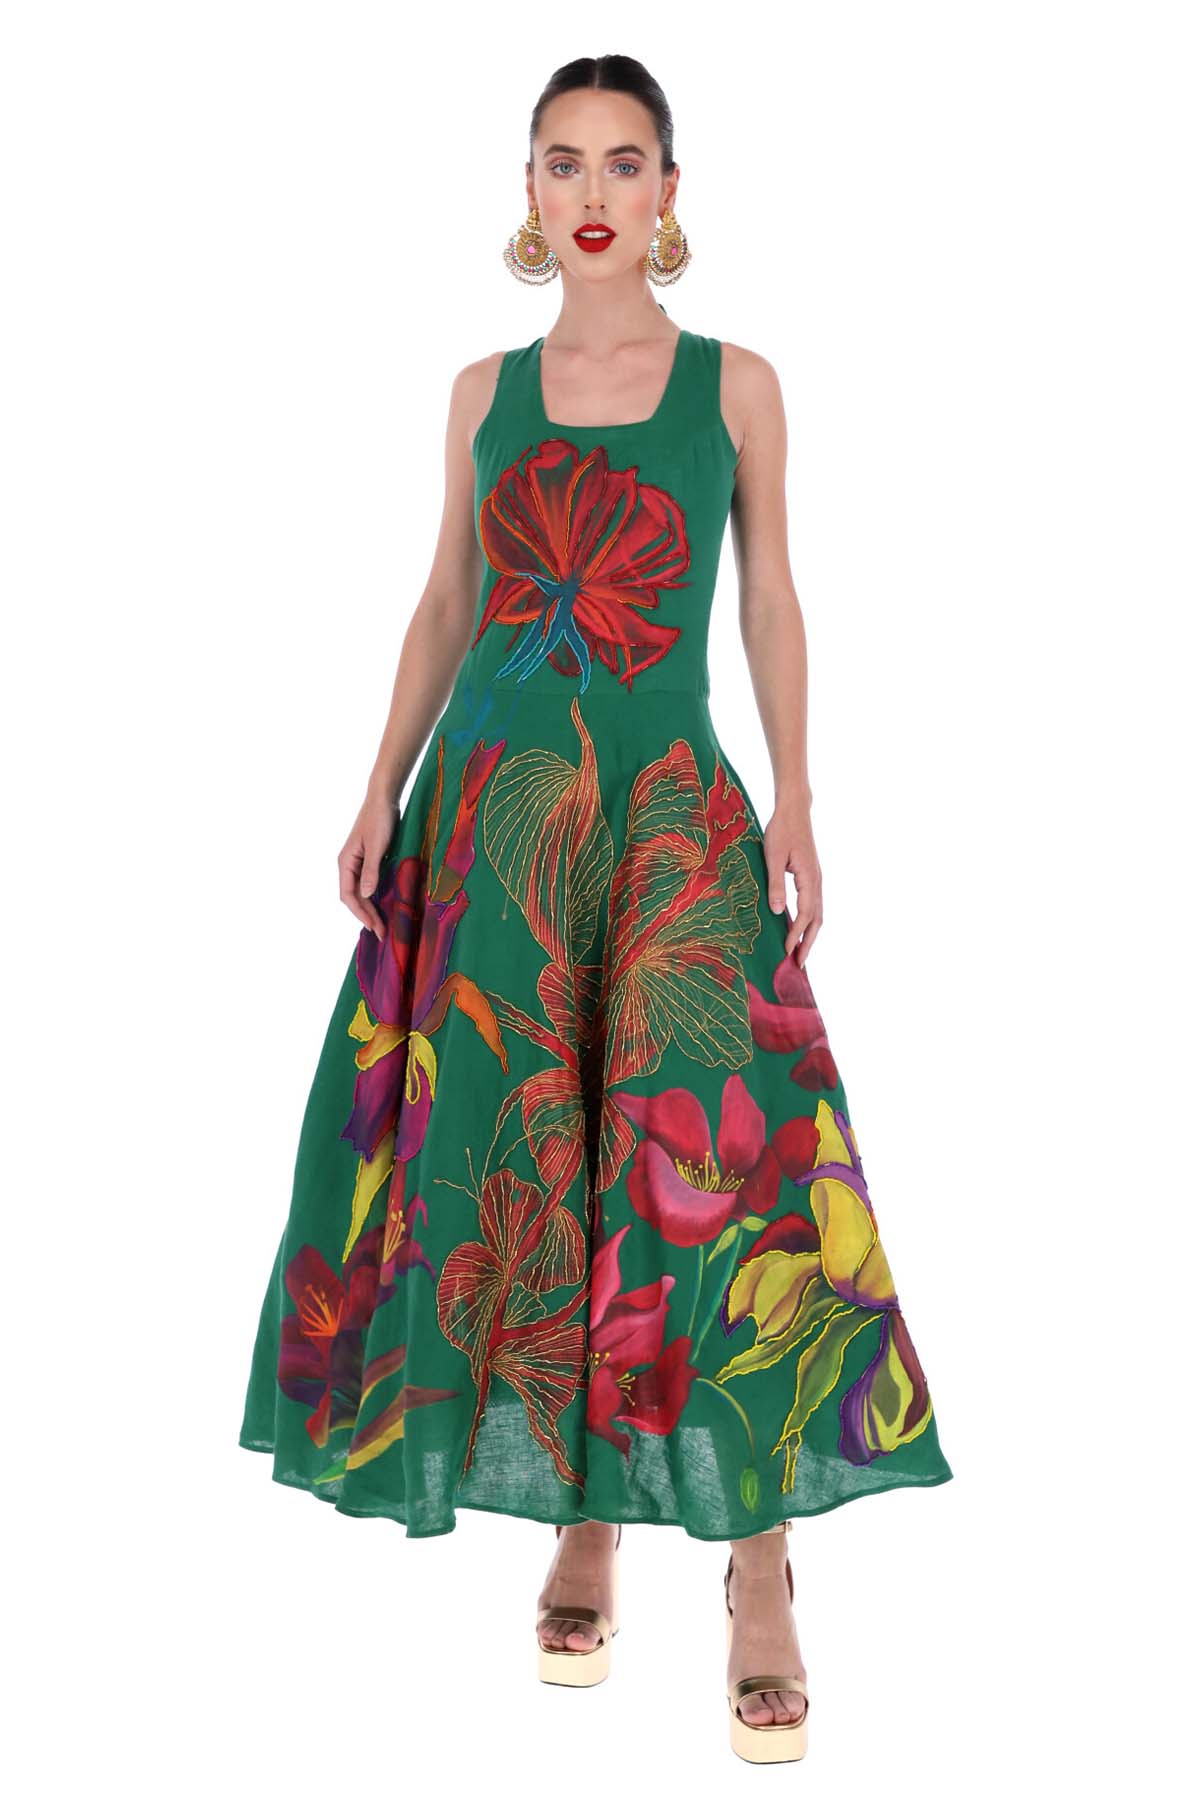 HAND PAINTED AND EMBROIDERED BELL MIDI DRESS - XOCHIQUETZAL